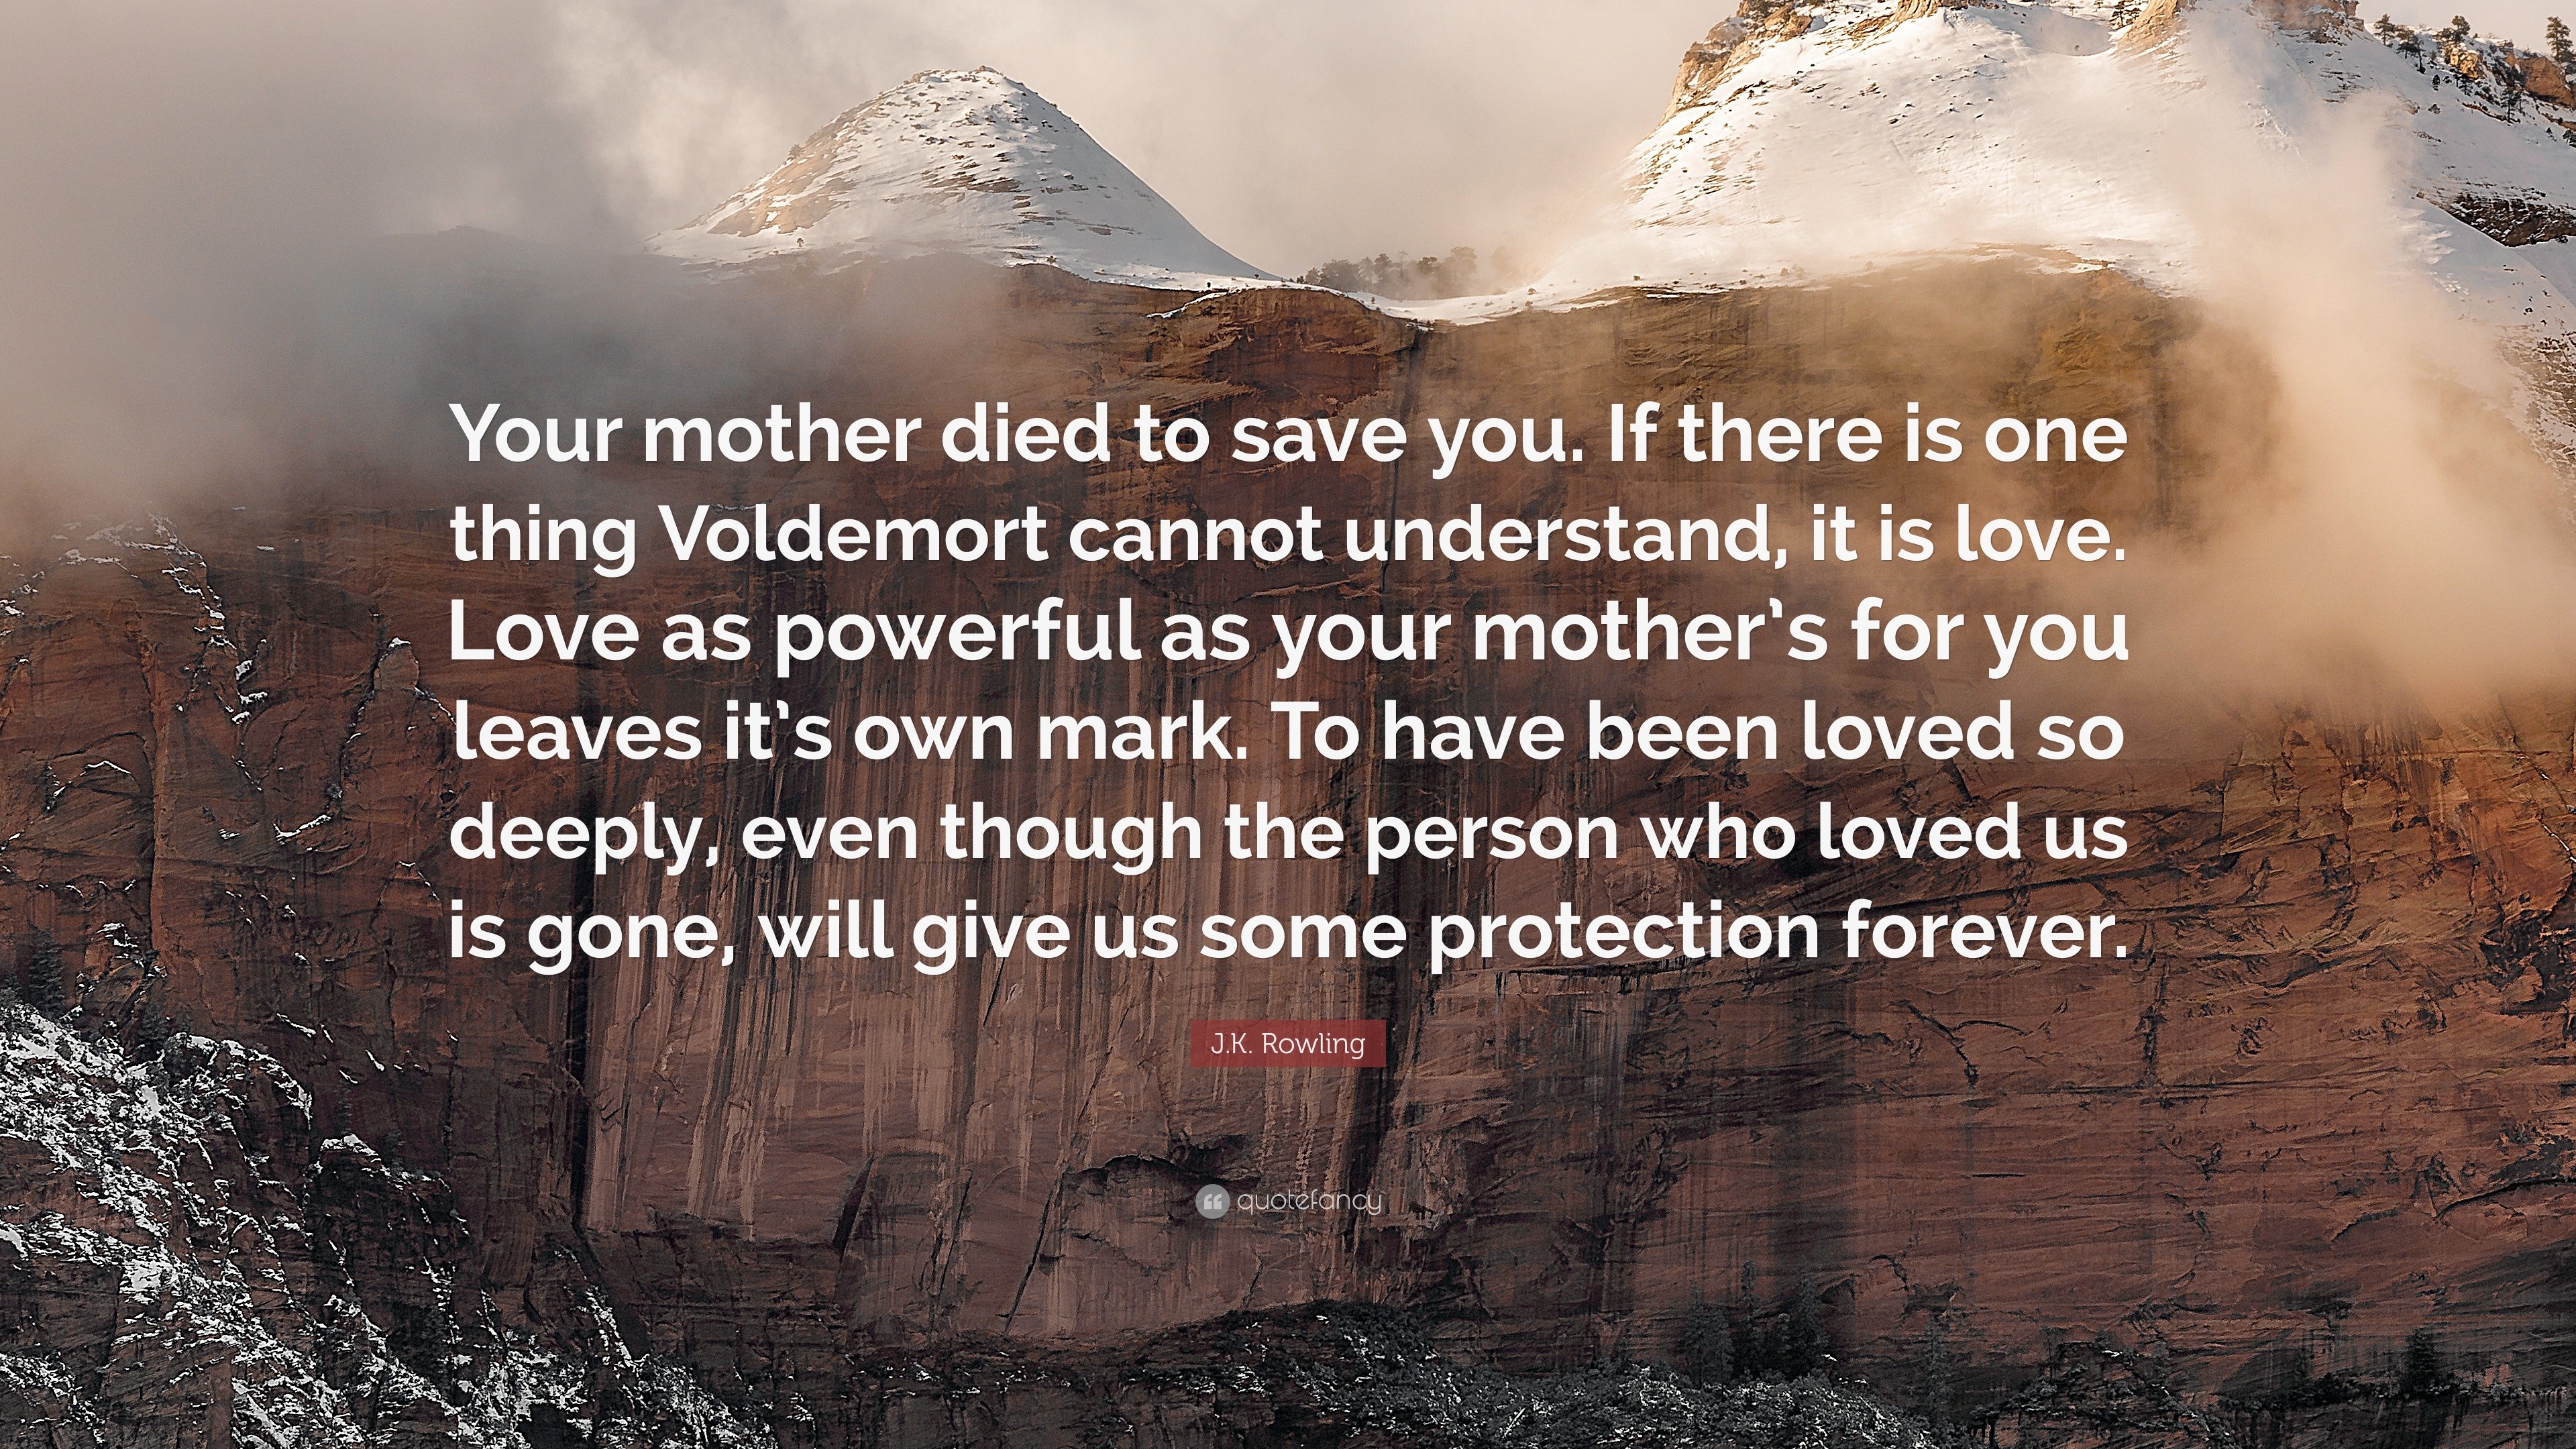 J K Rowling Quote “Your mother d to save you If there is one